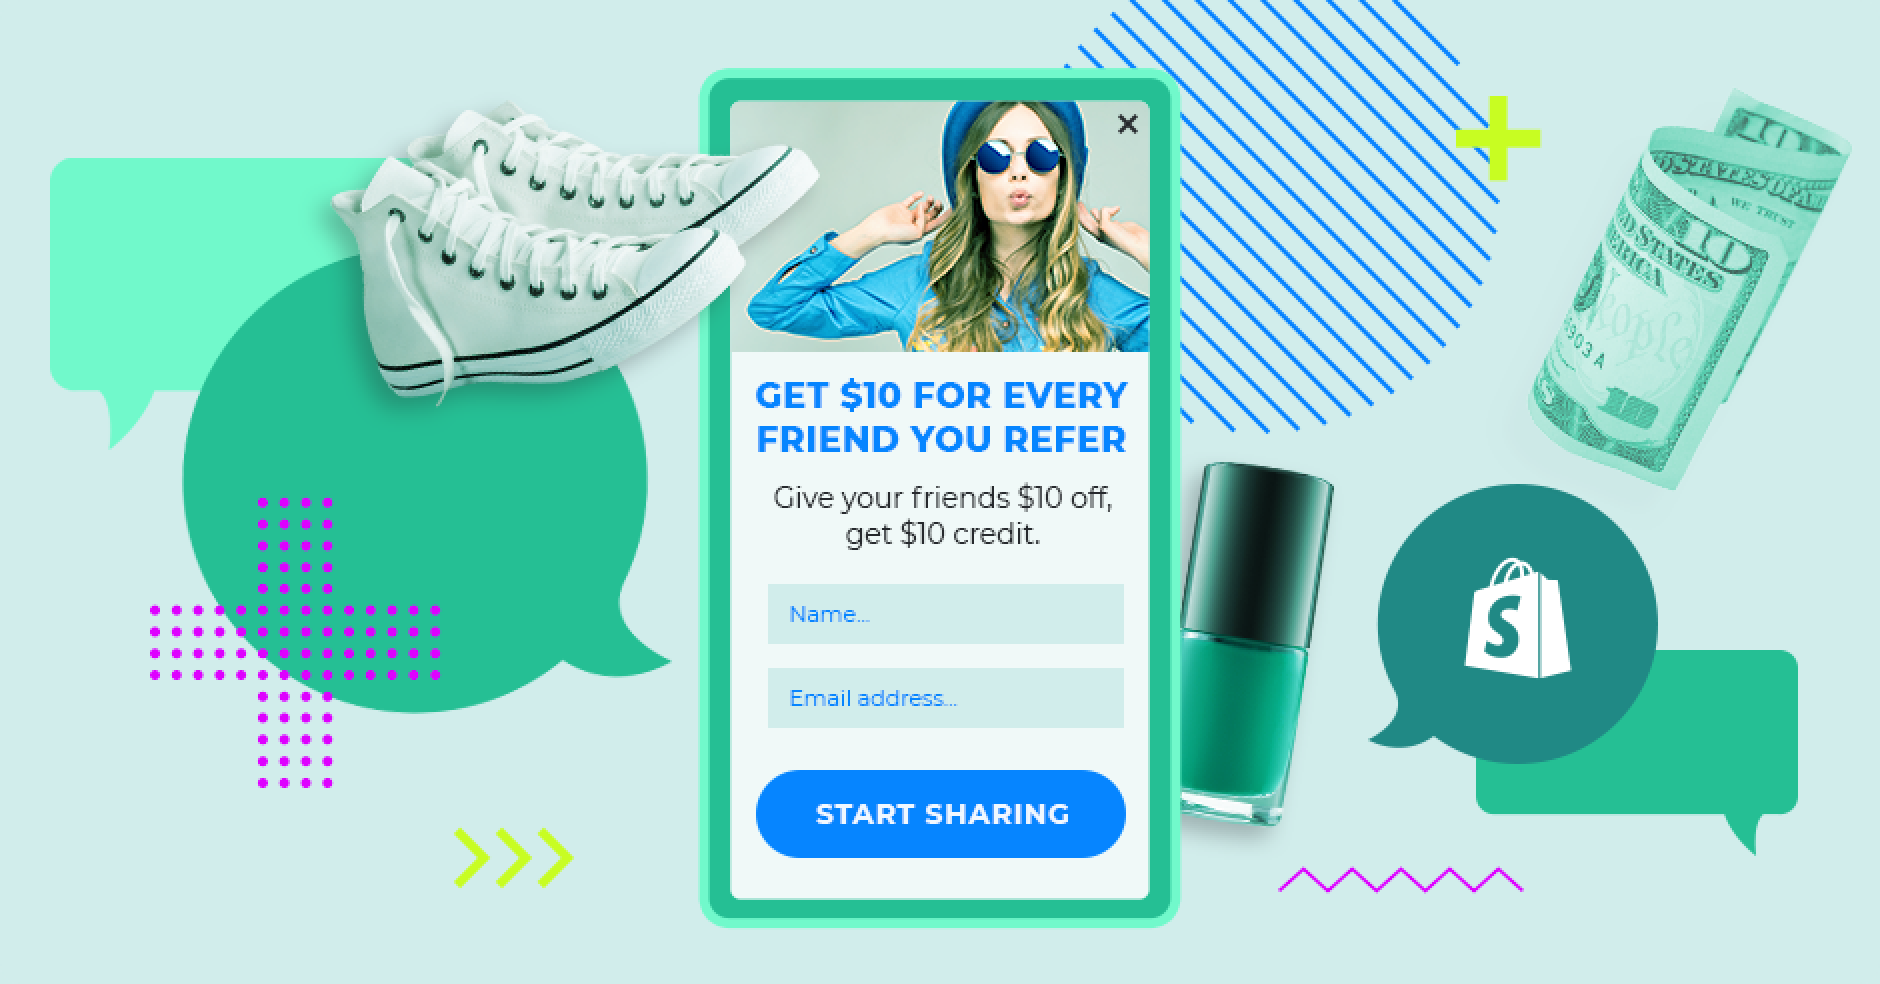 5 Retail Brands Prove Why Your Shopify Store Needs a Referral Program